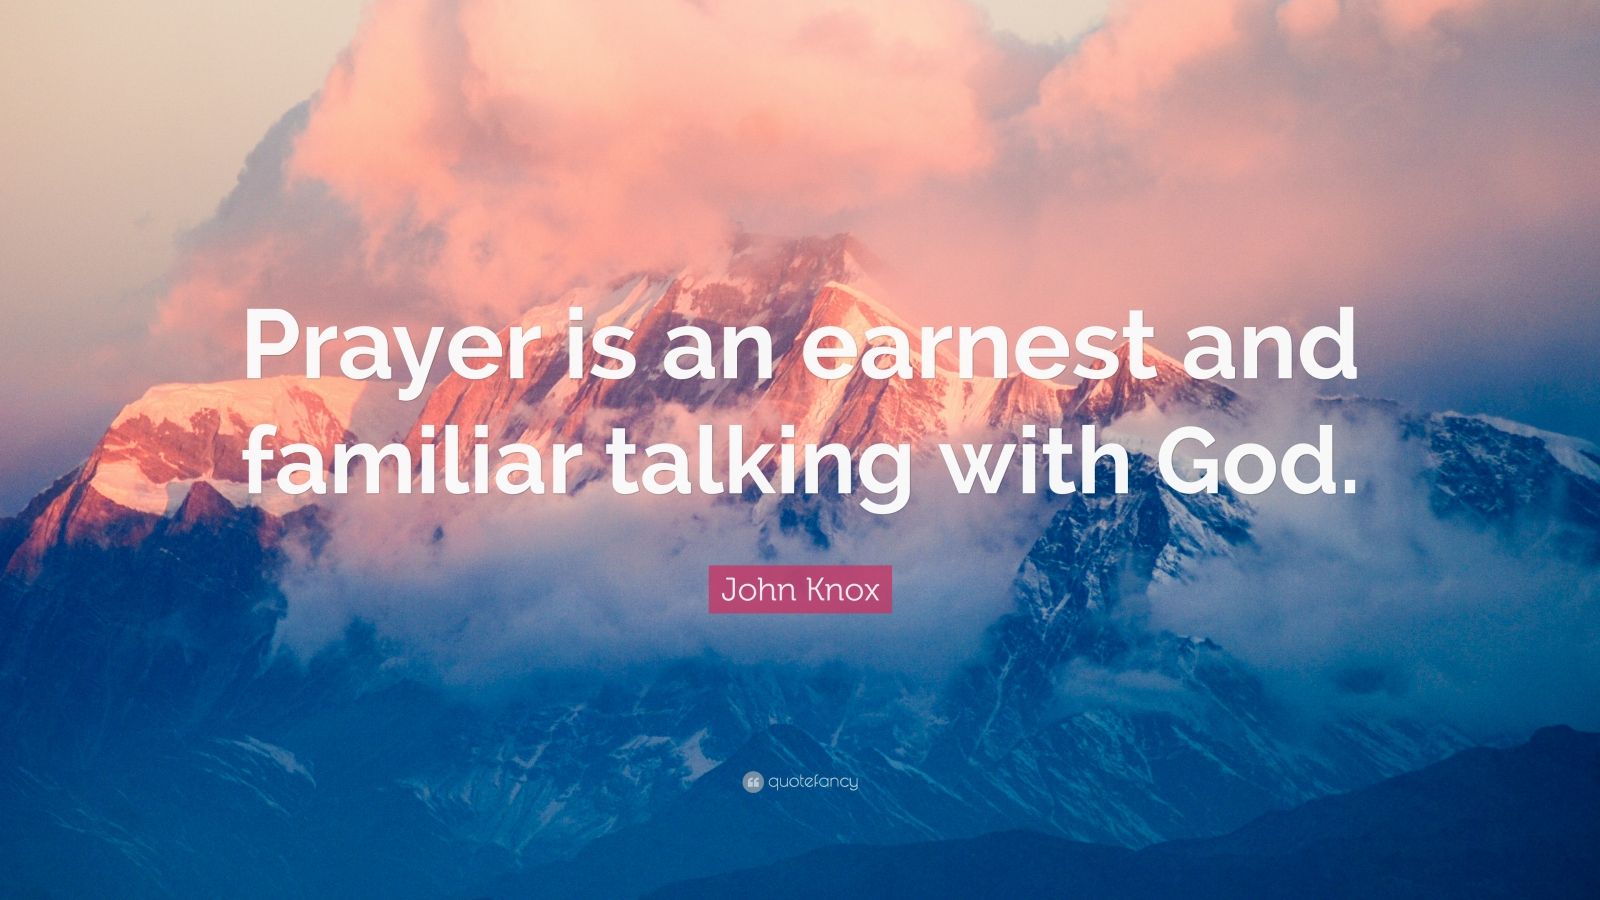 John Knox Quote: “Prayer is an earnest and familiar talking with God ...